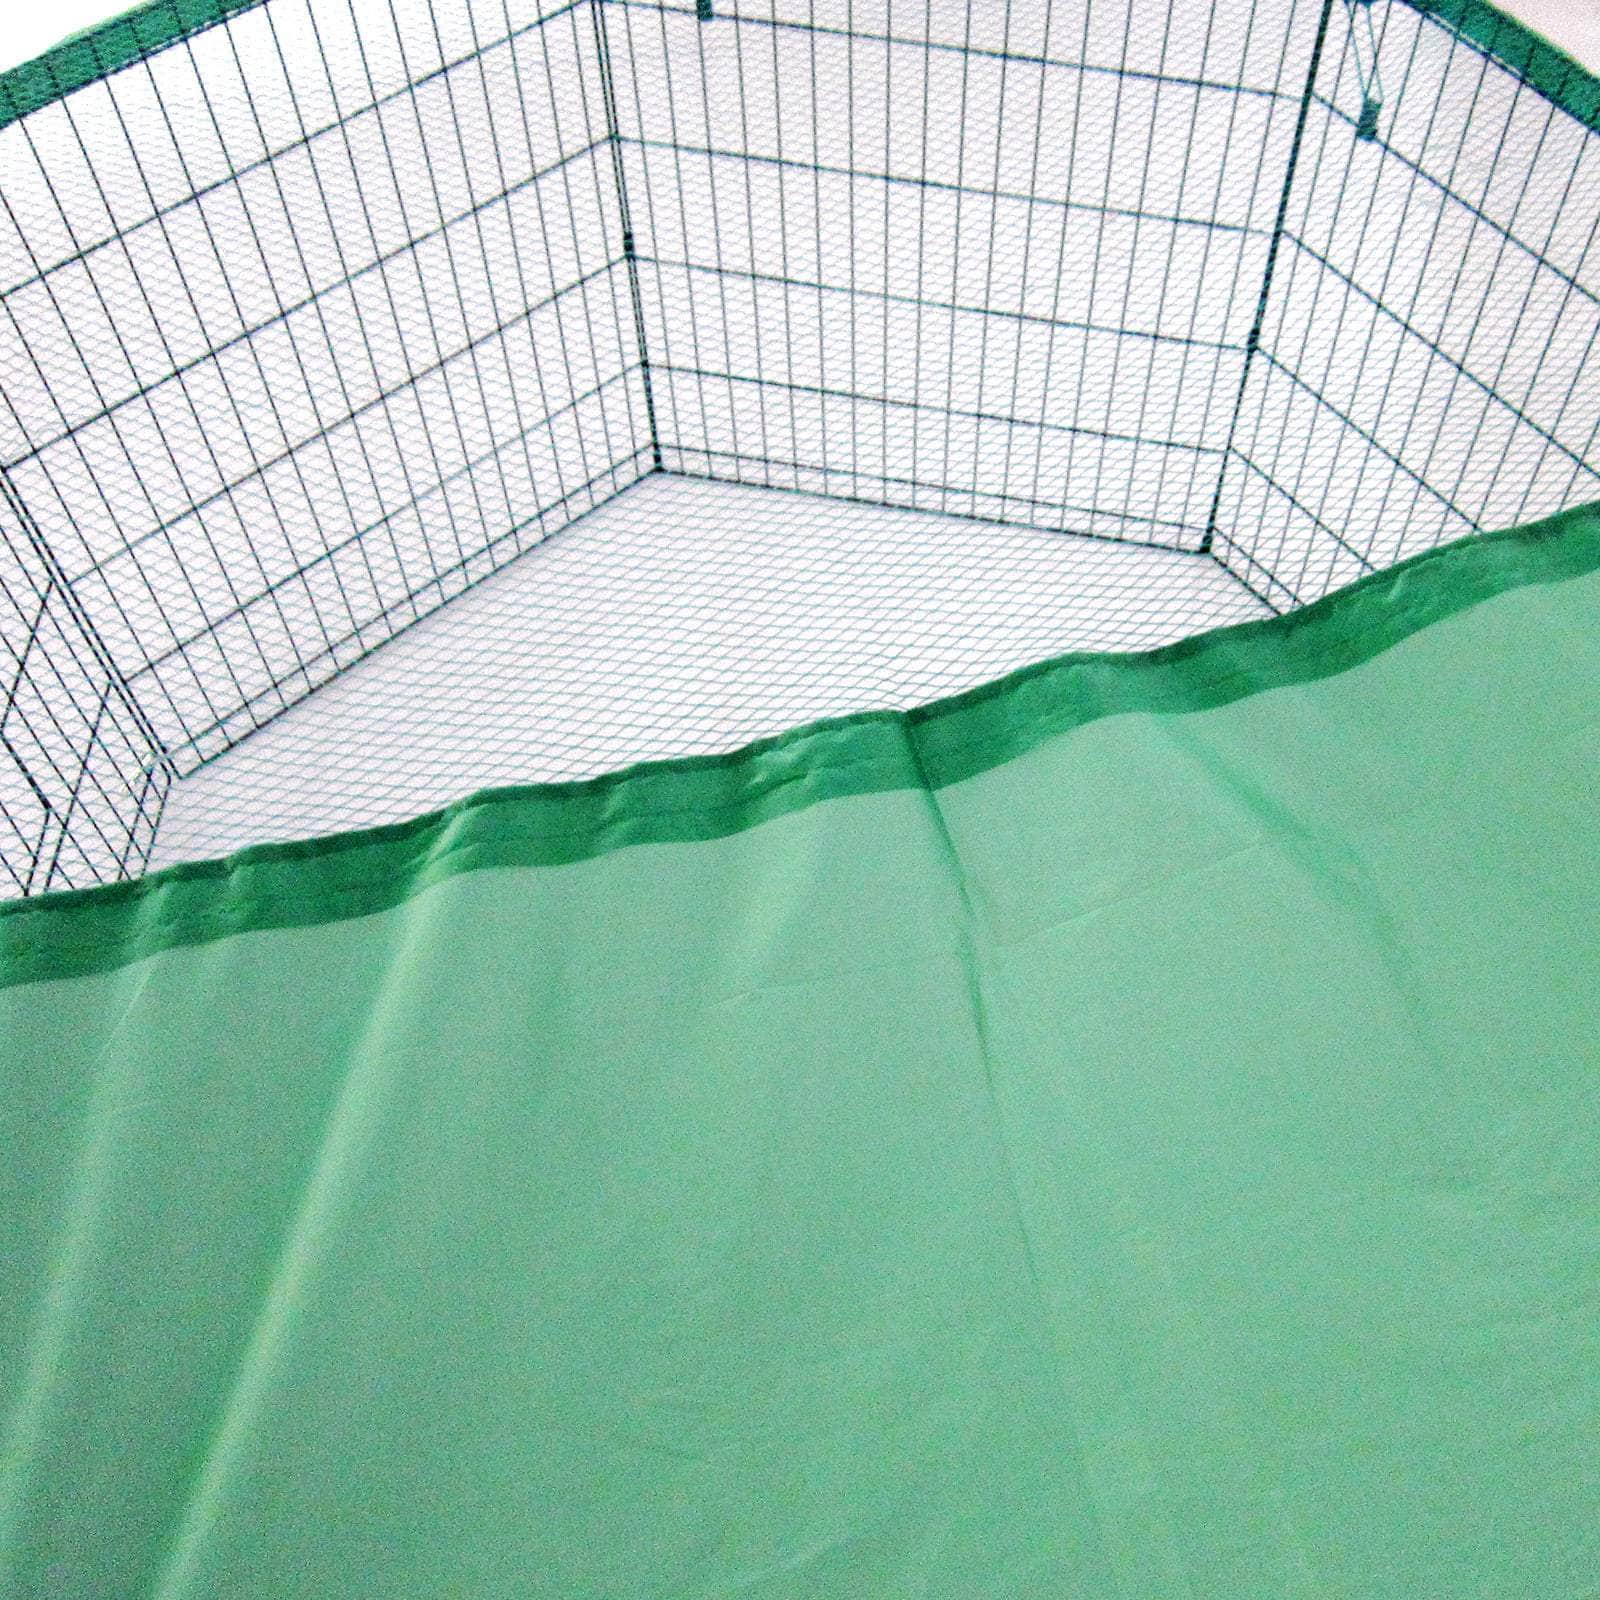 Green Net Cover For Pet Playpen 42In Dog Exercise Enclosure Fence Cage